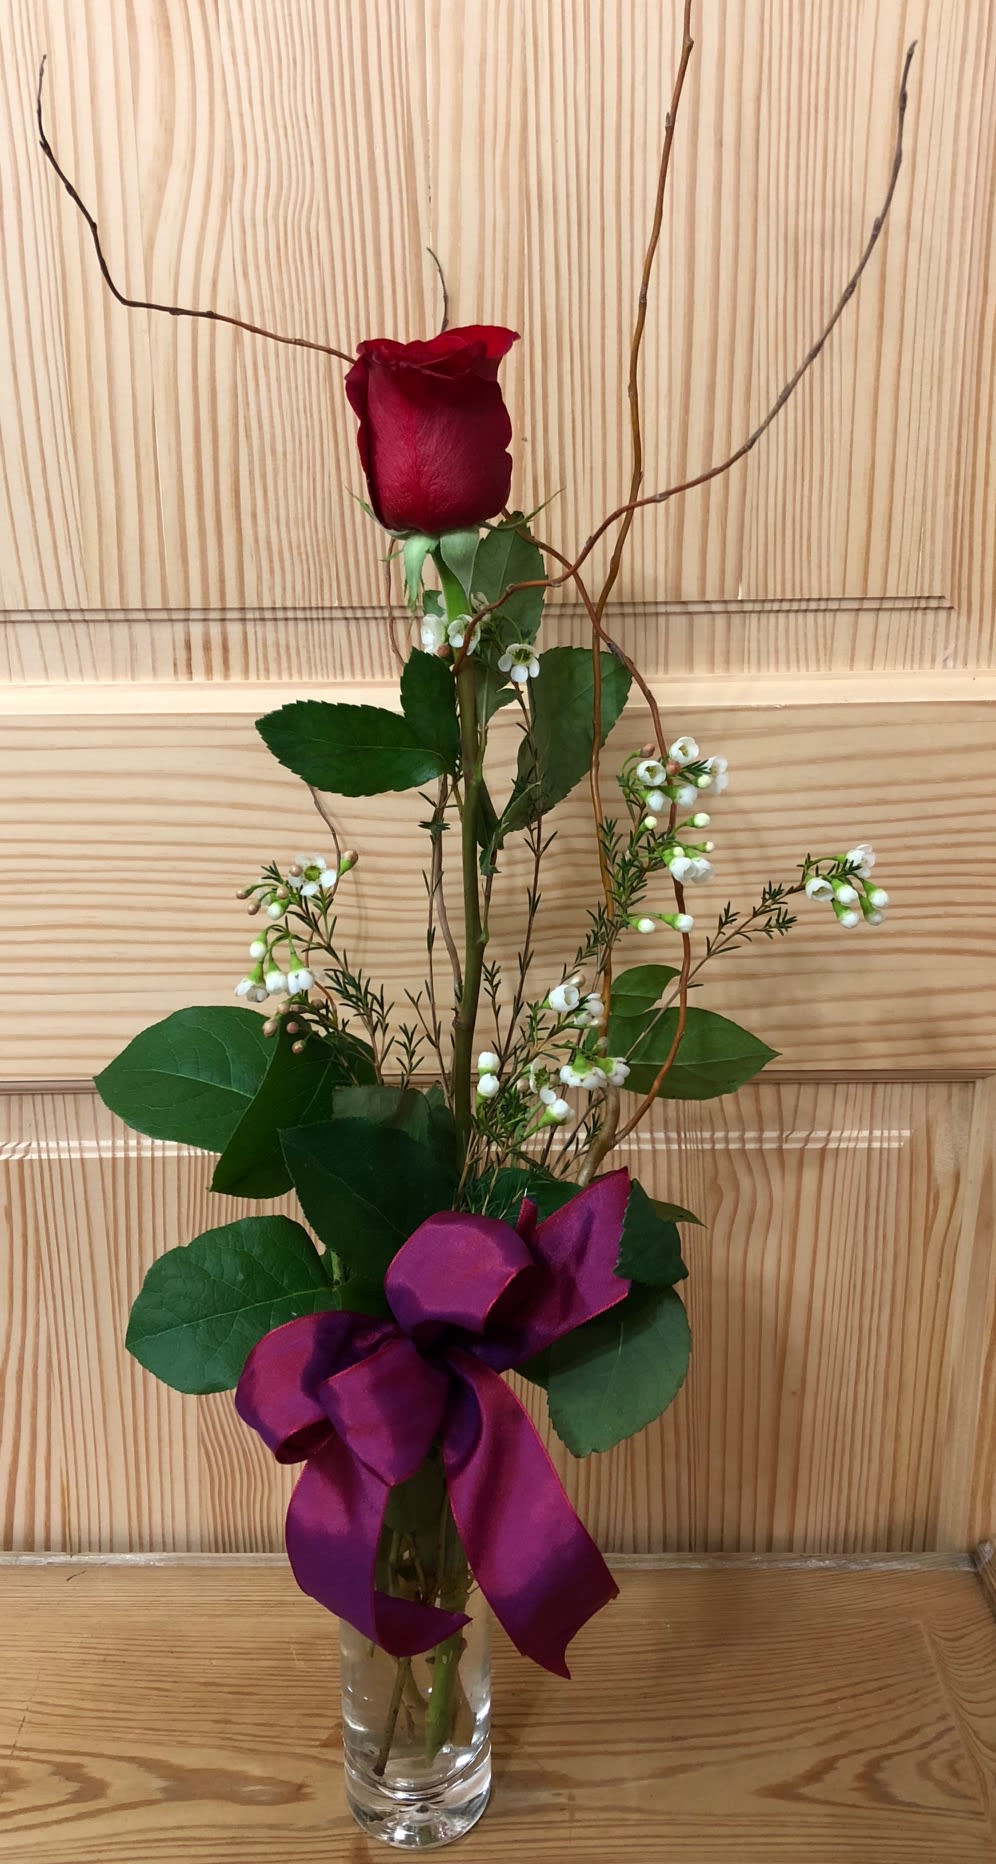 Single rose in a bud vase with greenery and filler. This can